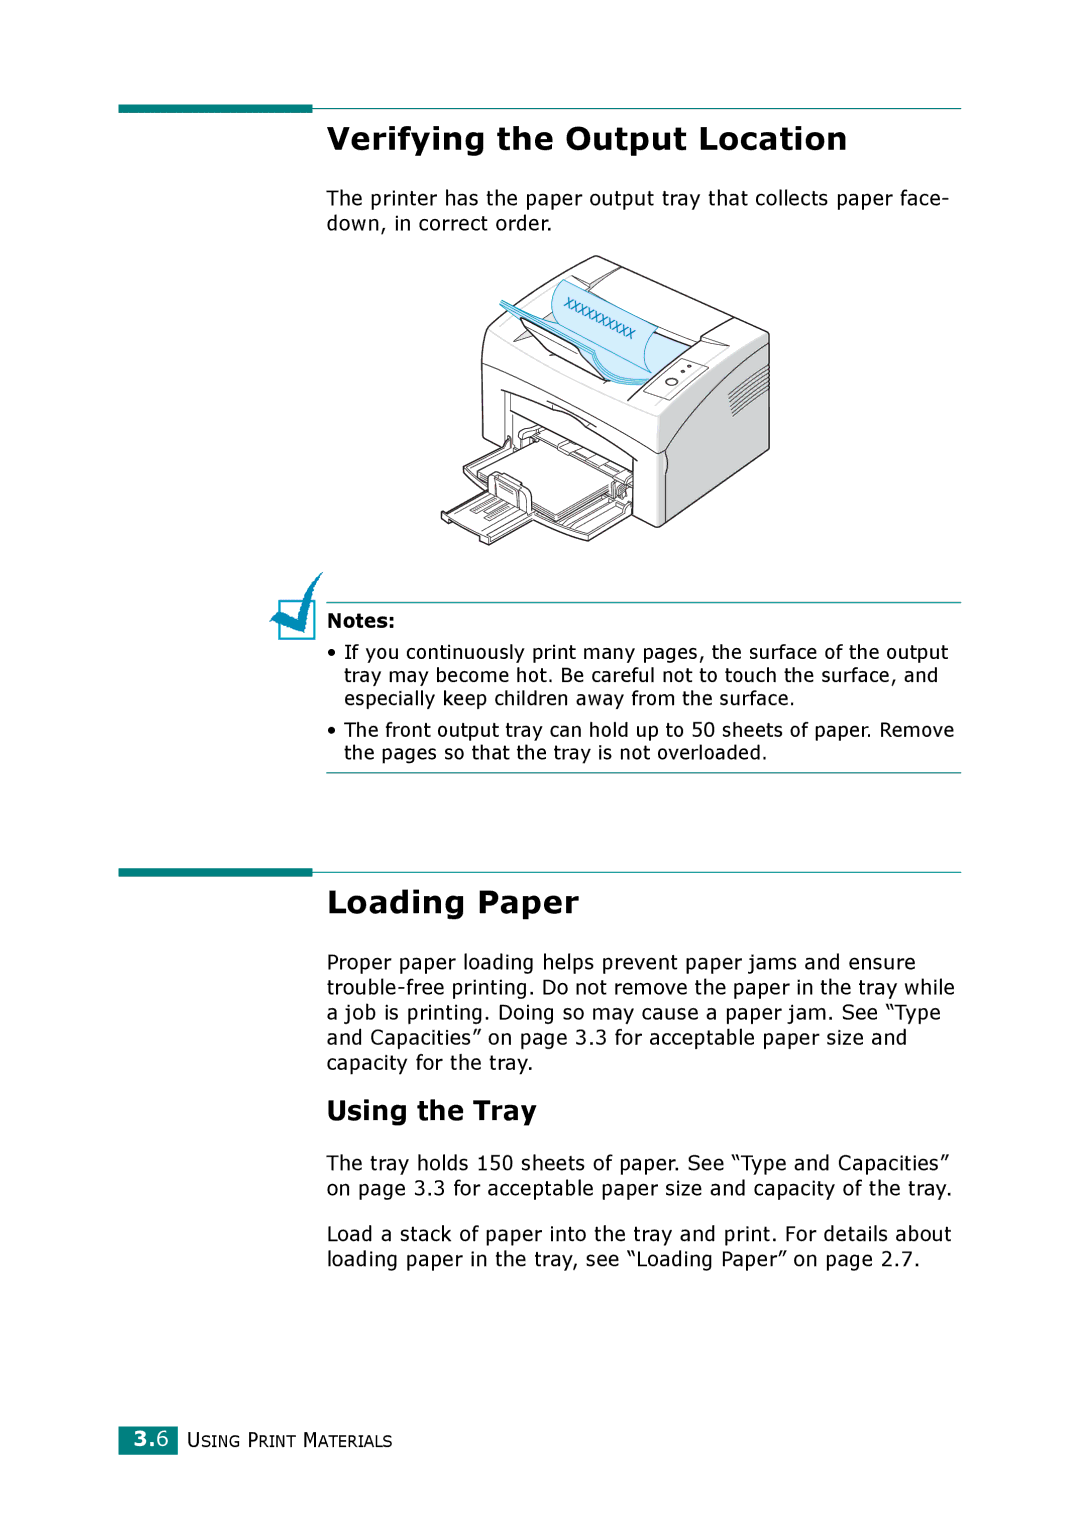 Xerox 3117 manual Verifying the Output Location, Using the Tray 